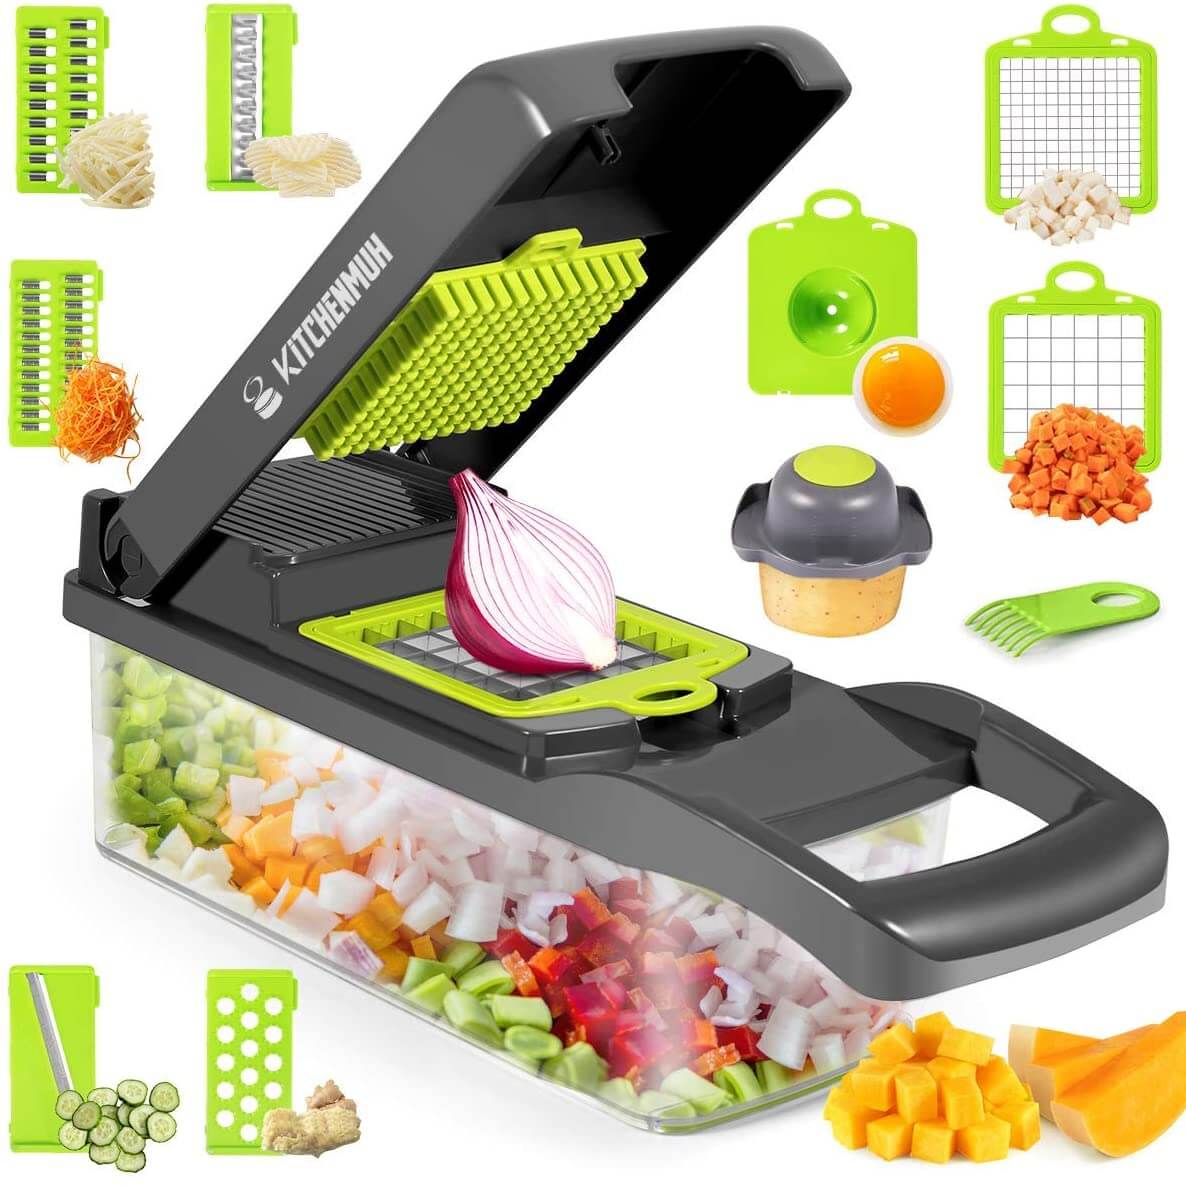 The 15 Best Vegetable Choppers to Make Vegetable Chopping Safe and